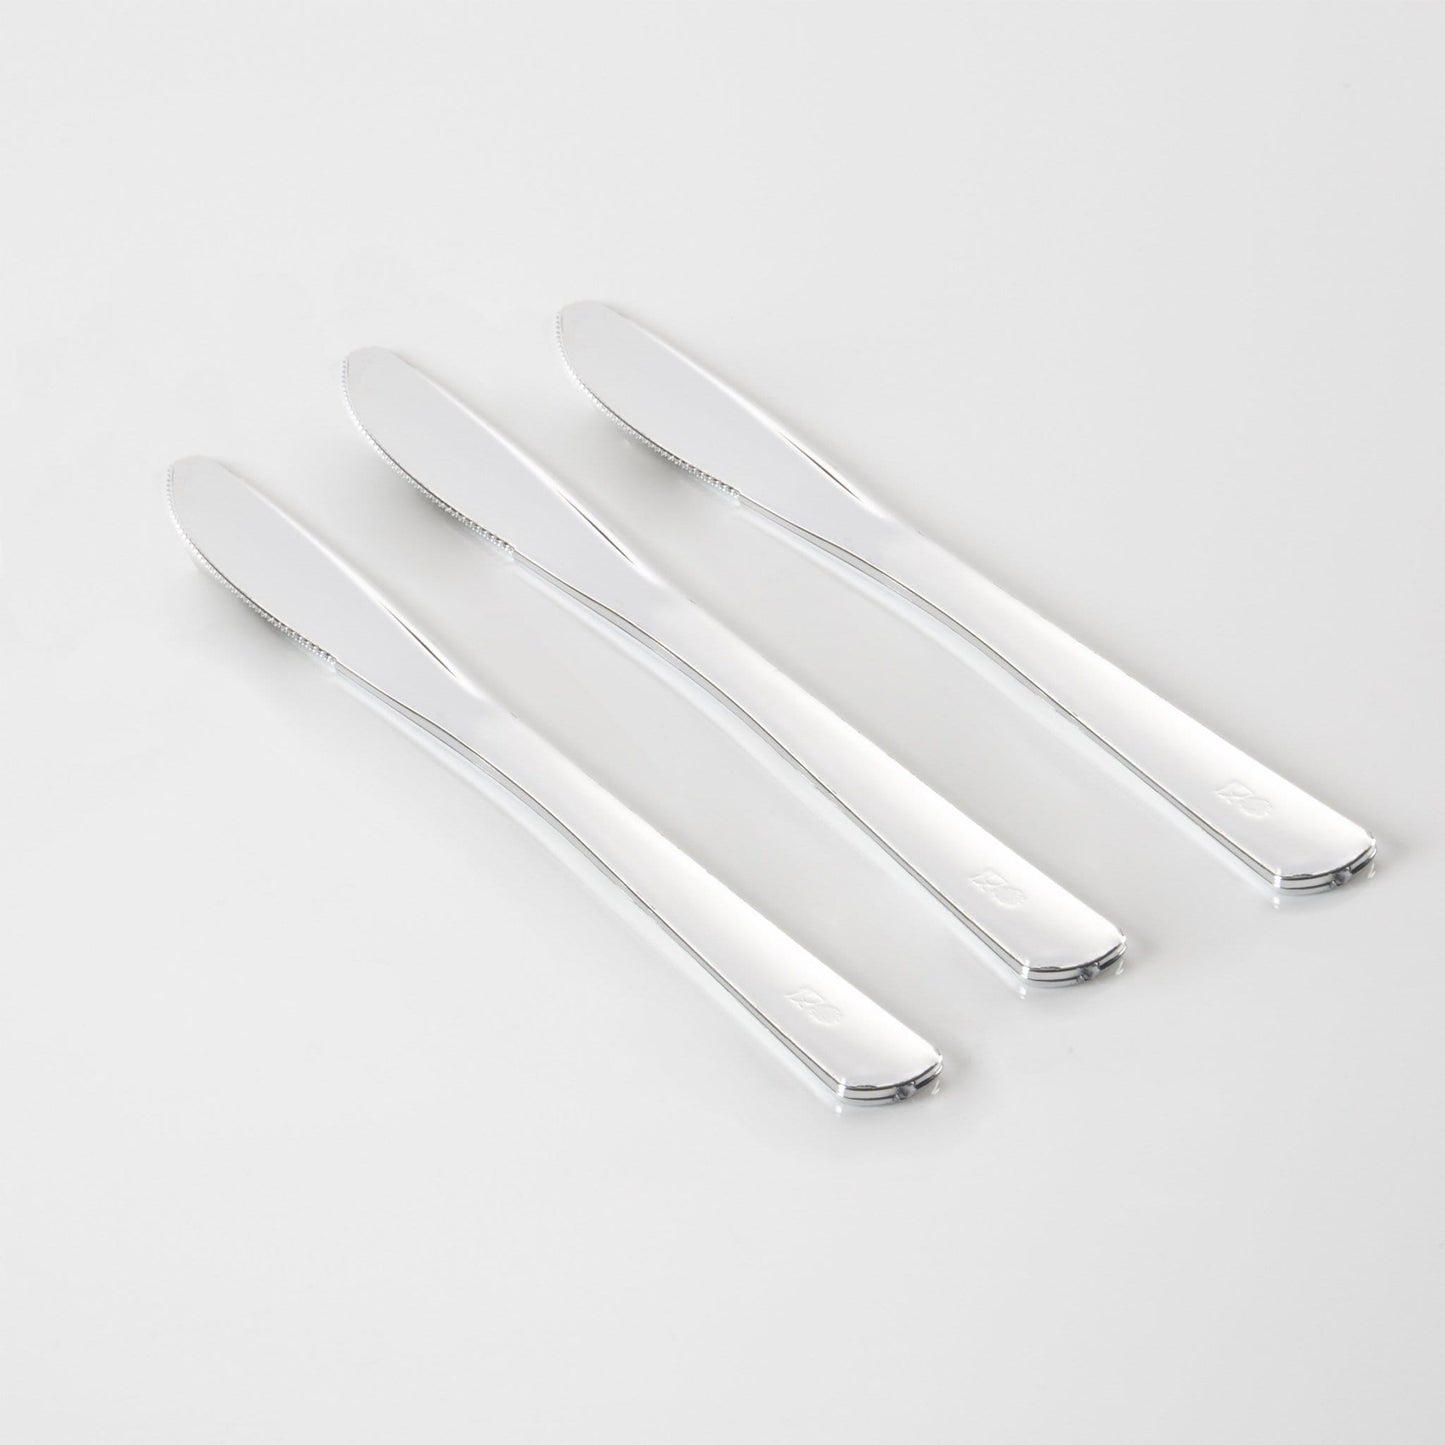 Classic Design Silver Plastic Knives | 20 Knives - SimplySoiree